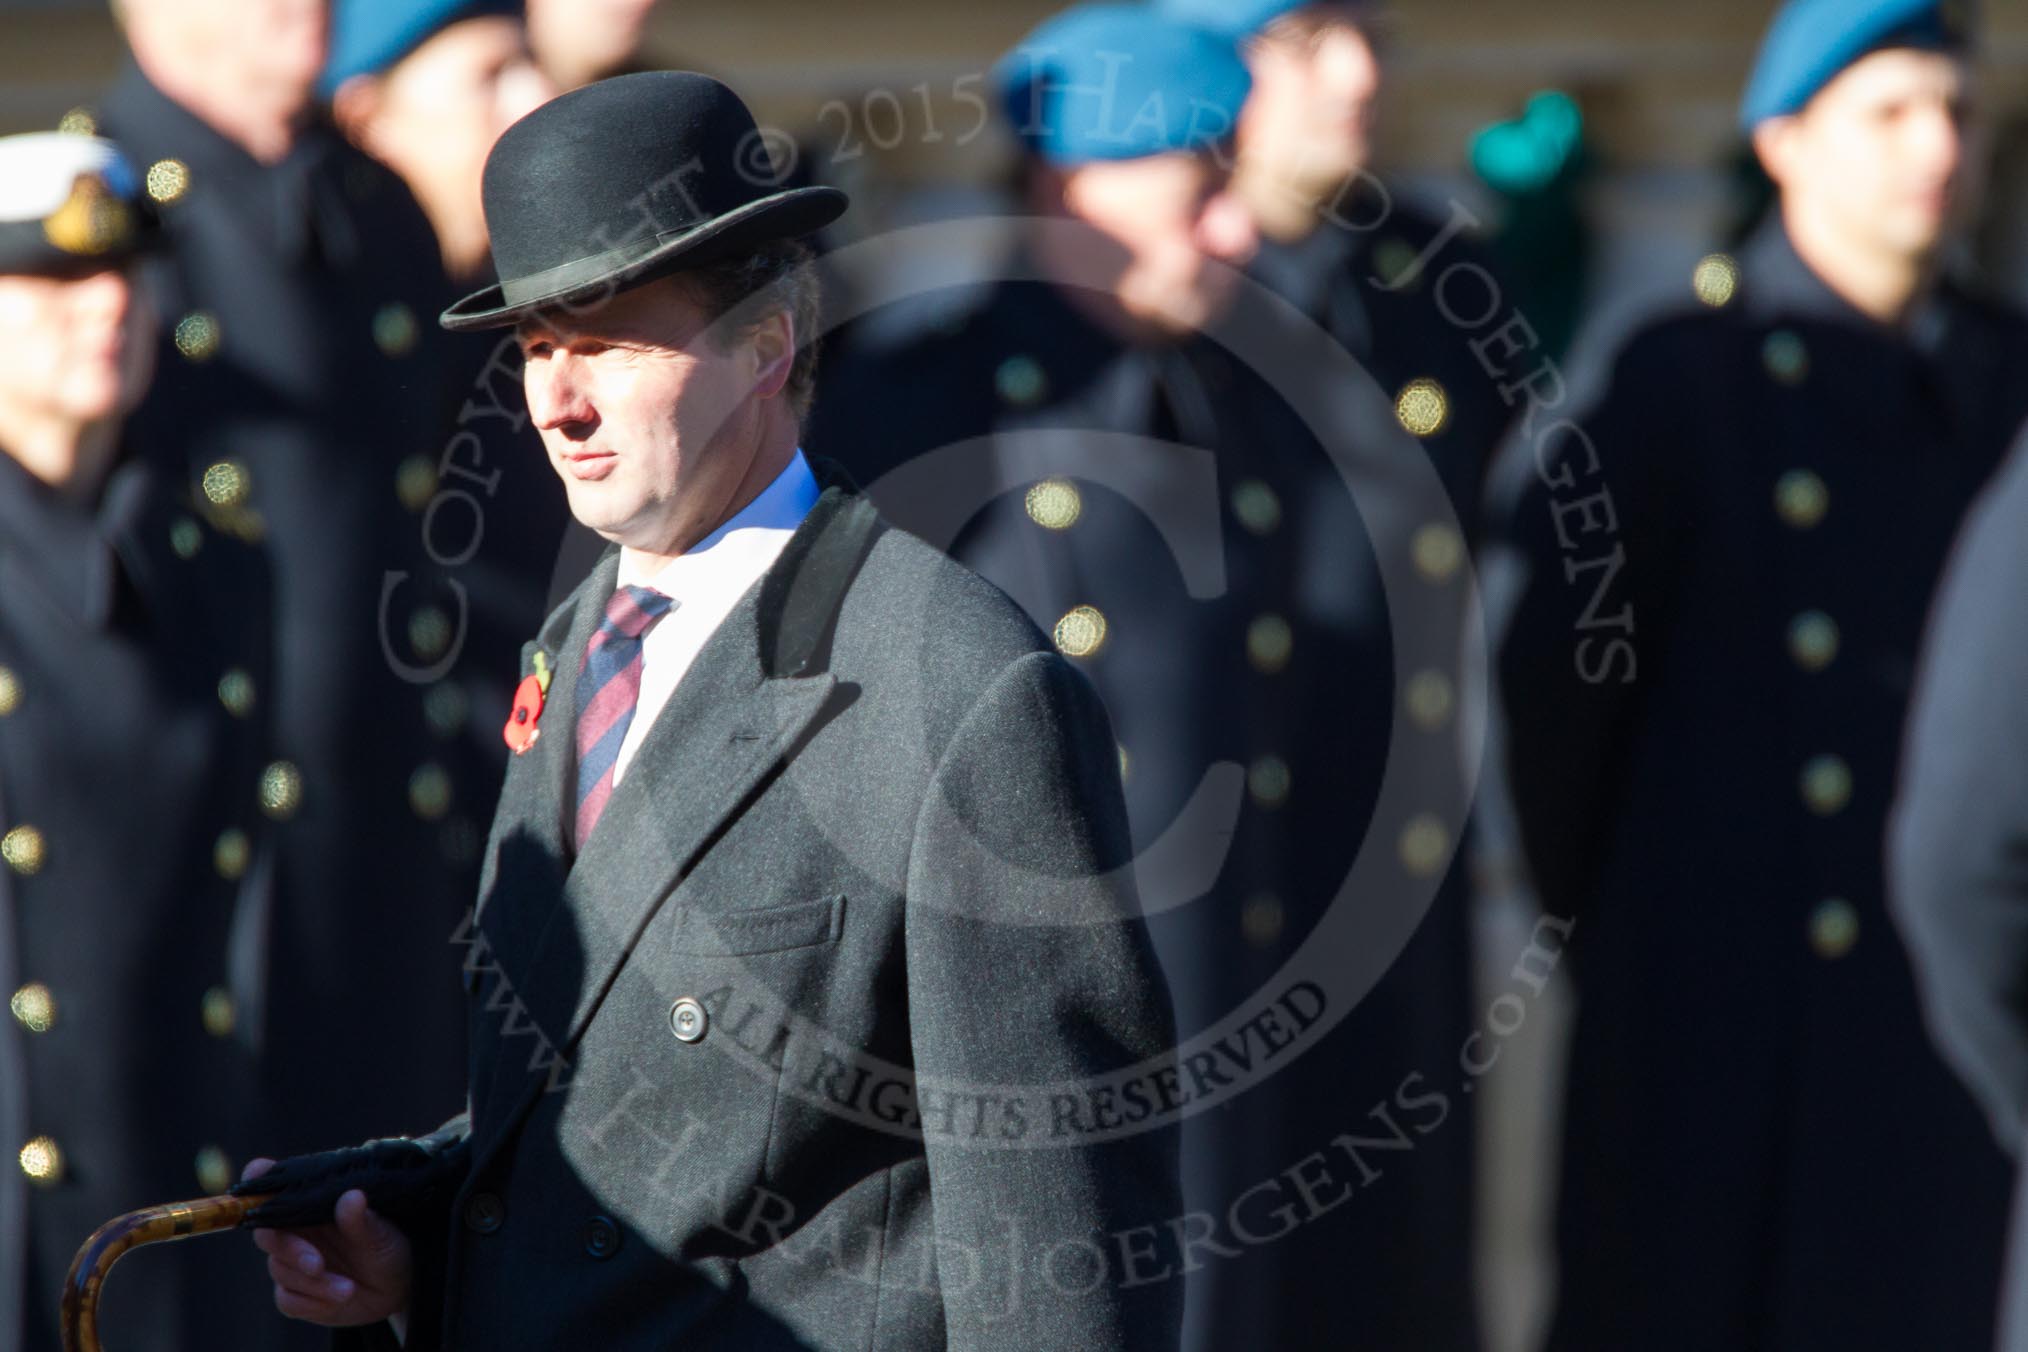 Remembrance Sunday Cenotaph March Past 2013: D34 - Walking With The Wounded. Here Fergus Williams, Director of Operations WWTW..
Press stand opposite the Foreign Office building, Whitehall, London SW1,
London,
Greater London,
United Kingdom,
on 10 November 2013 at 11:44, image #315